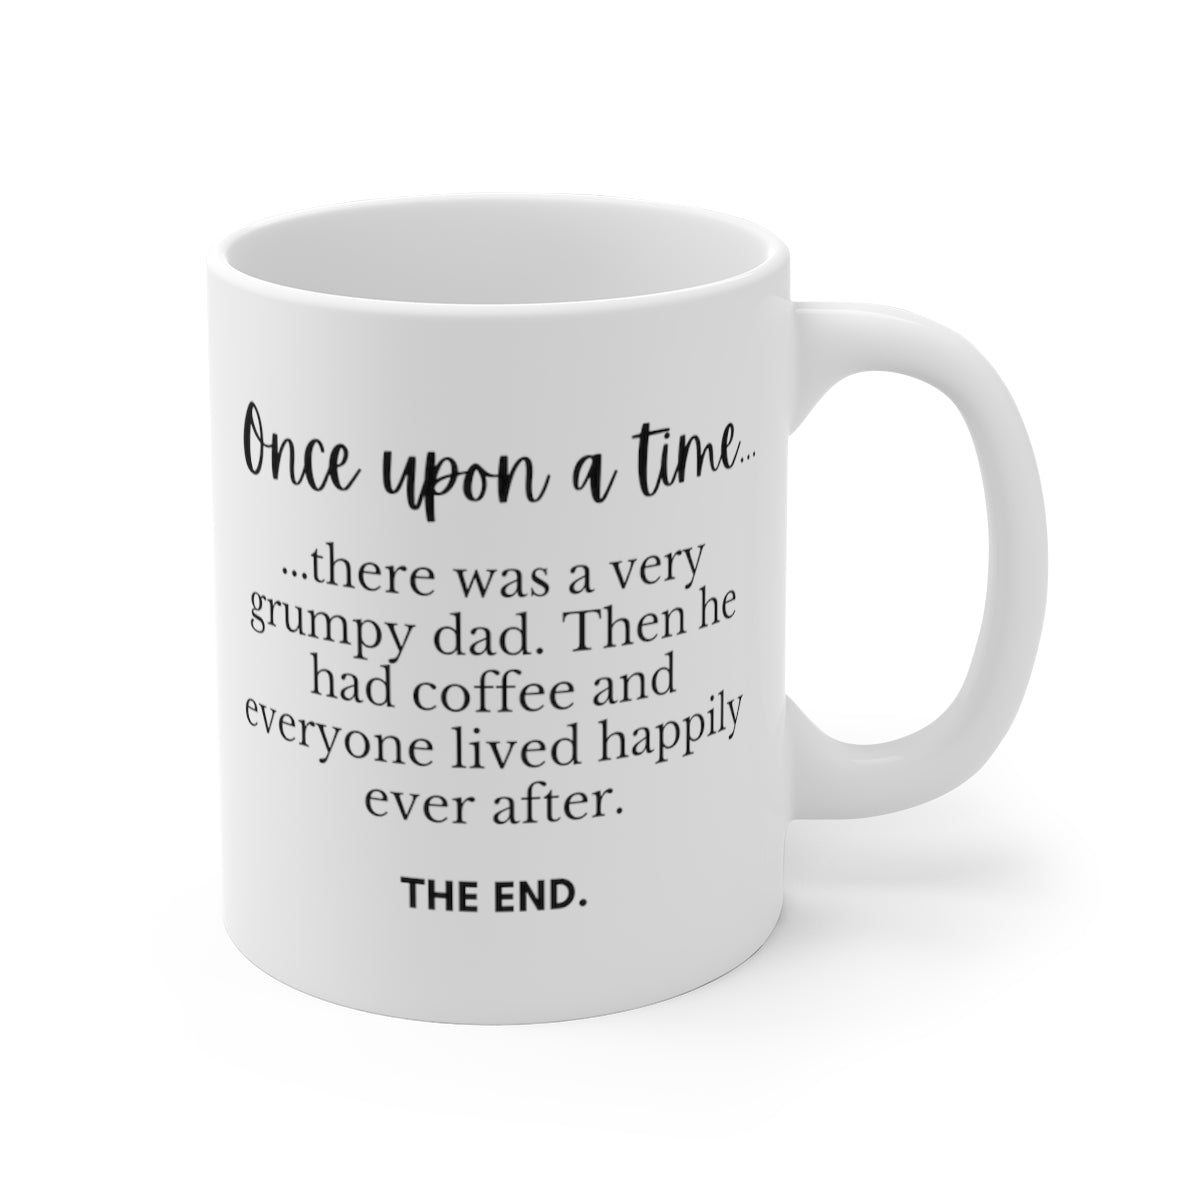 Once Upon A Time There Was A Very Grumpy Dad. Then He Had Coffee... | Funny Mug for Coffee Lovers | Mug 11oz